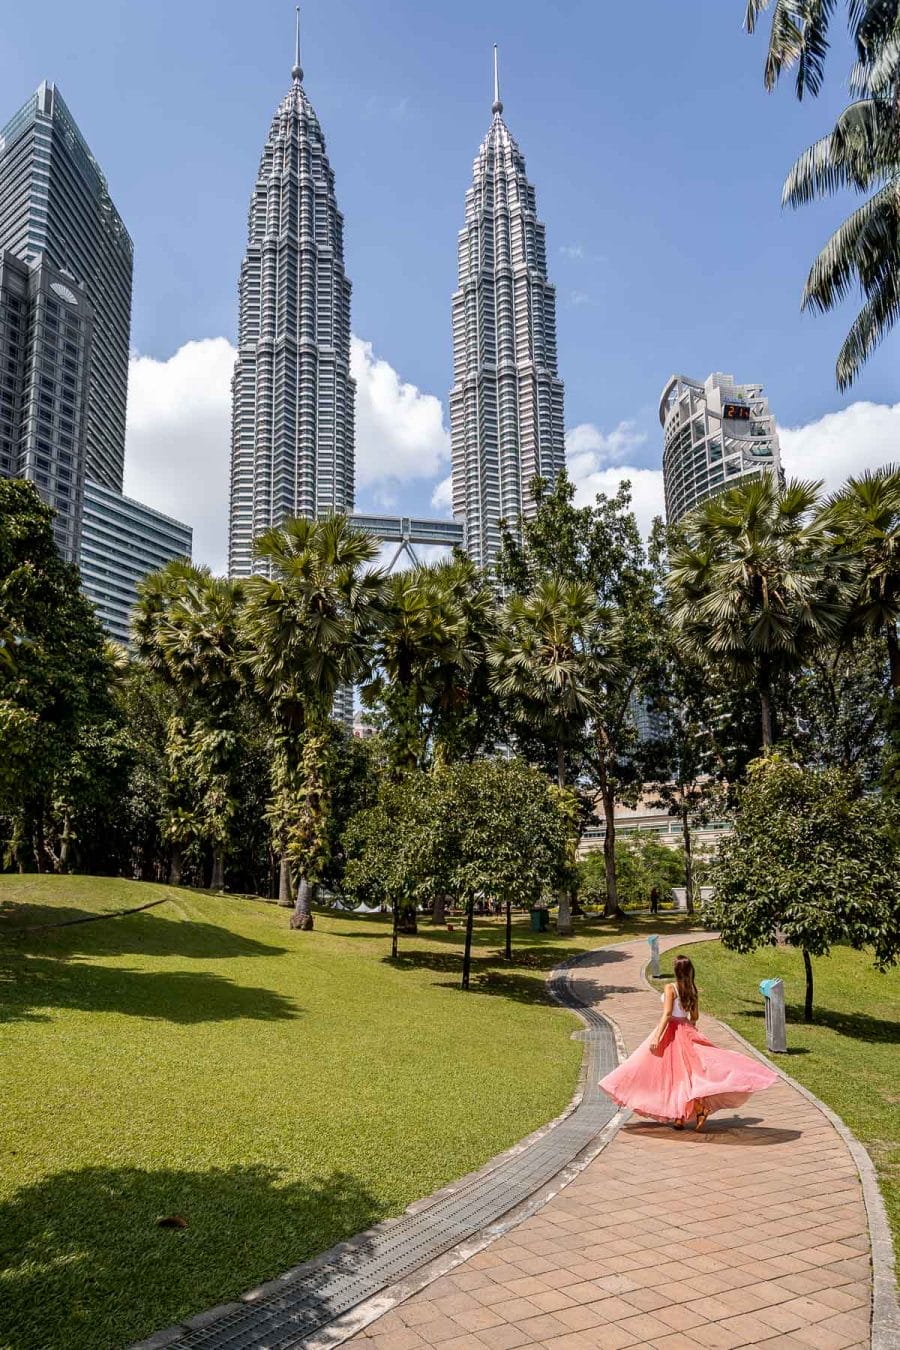 Girl in pink skirt in front of the Petronas Towers in Kuala Lumpur